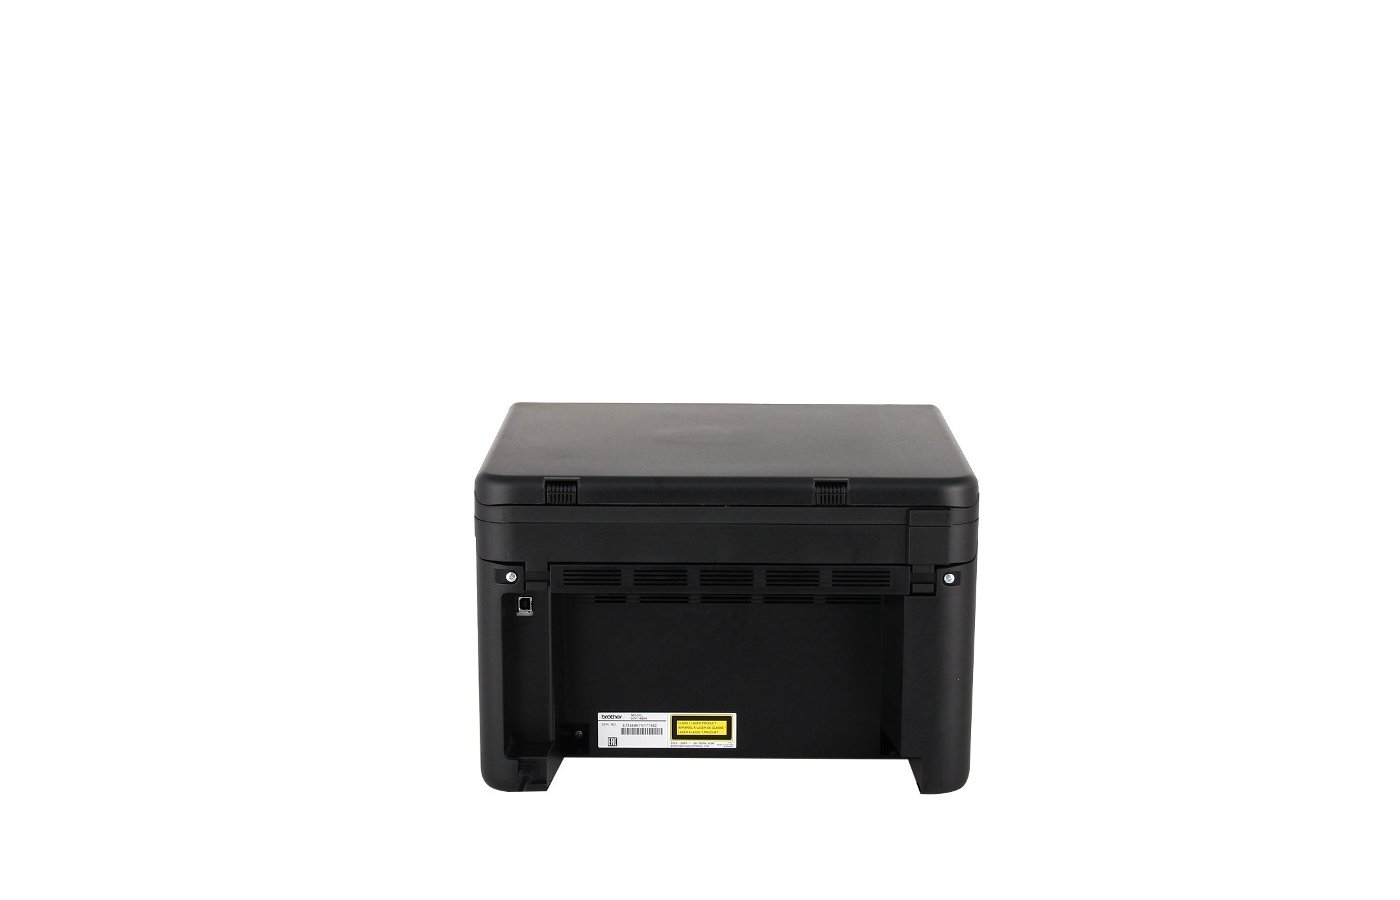 Brother DCP-1602r. Принтер DCP 1602r. Brother 1602r. Бразер 1602. Принтер brother dcp 1602r